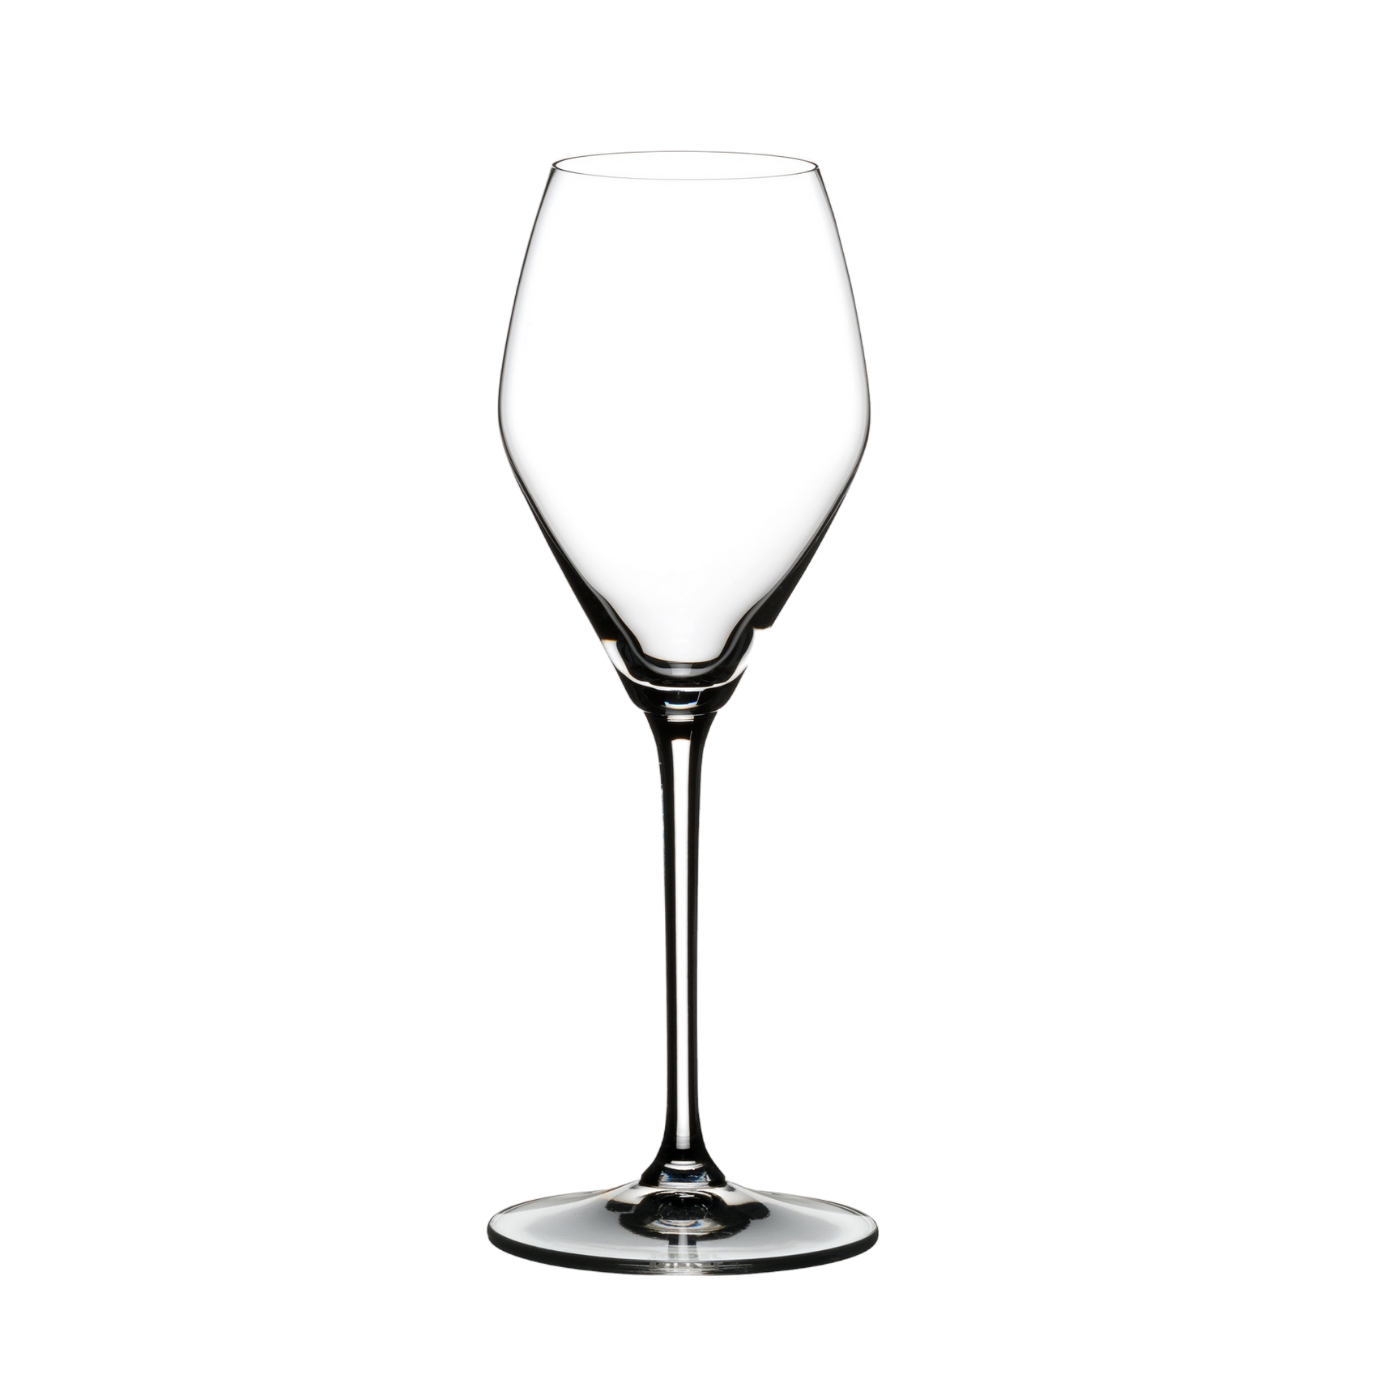 Riedel Extreme Rosé Champagne Glasses (set of 2)